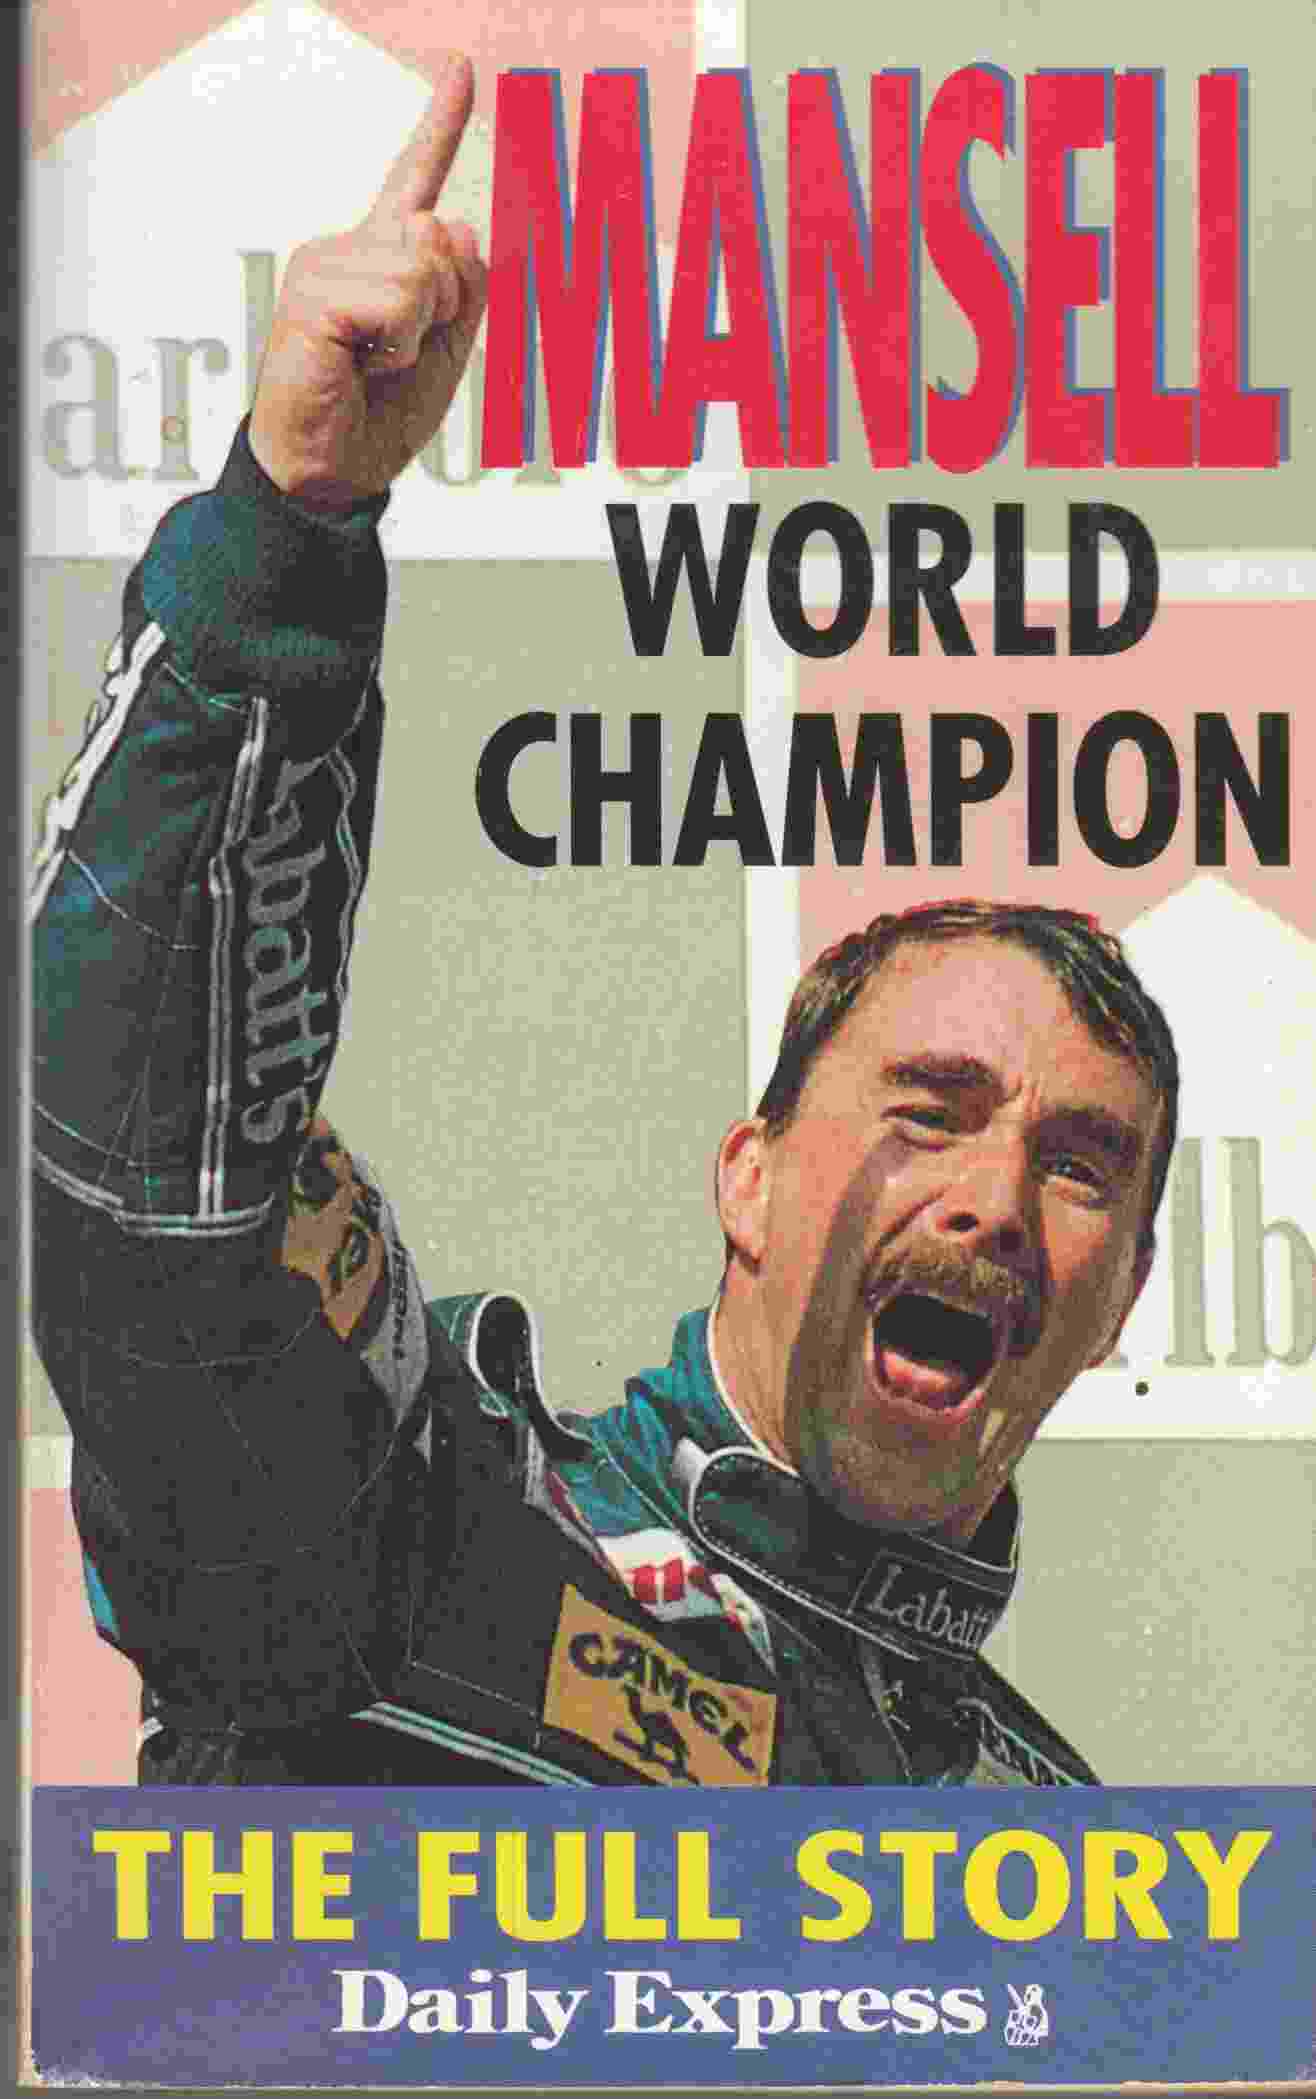 Image for Nigell Mansell World Champion The Full Story